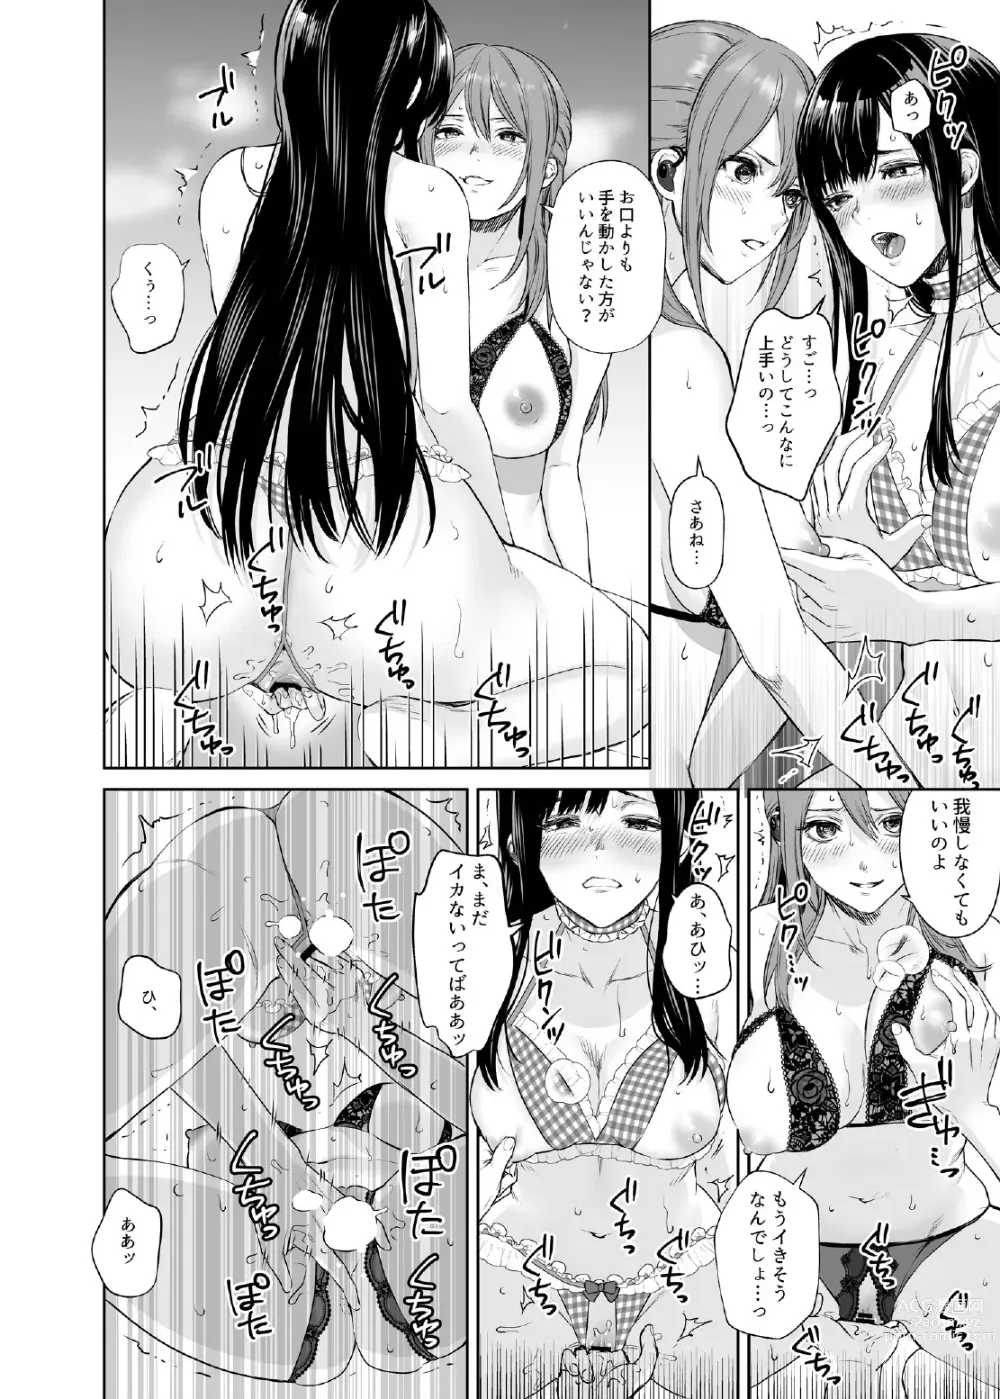 Page 10 of doujinshi LESFES CO CANDID REPORTING VOL.004